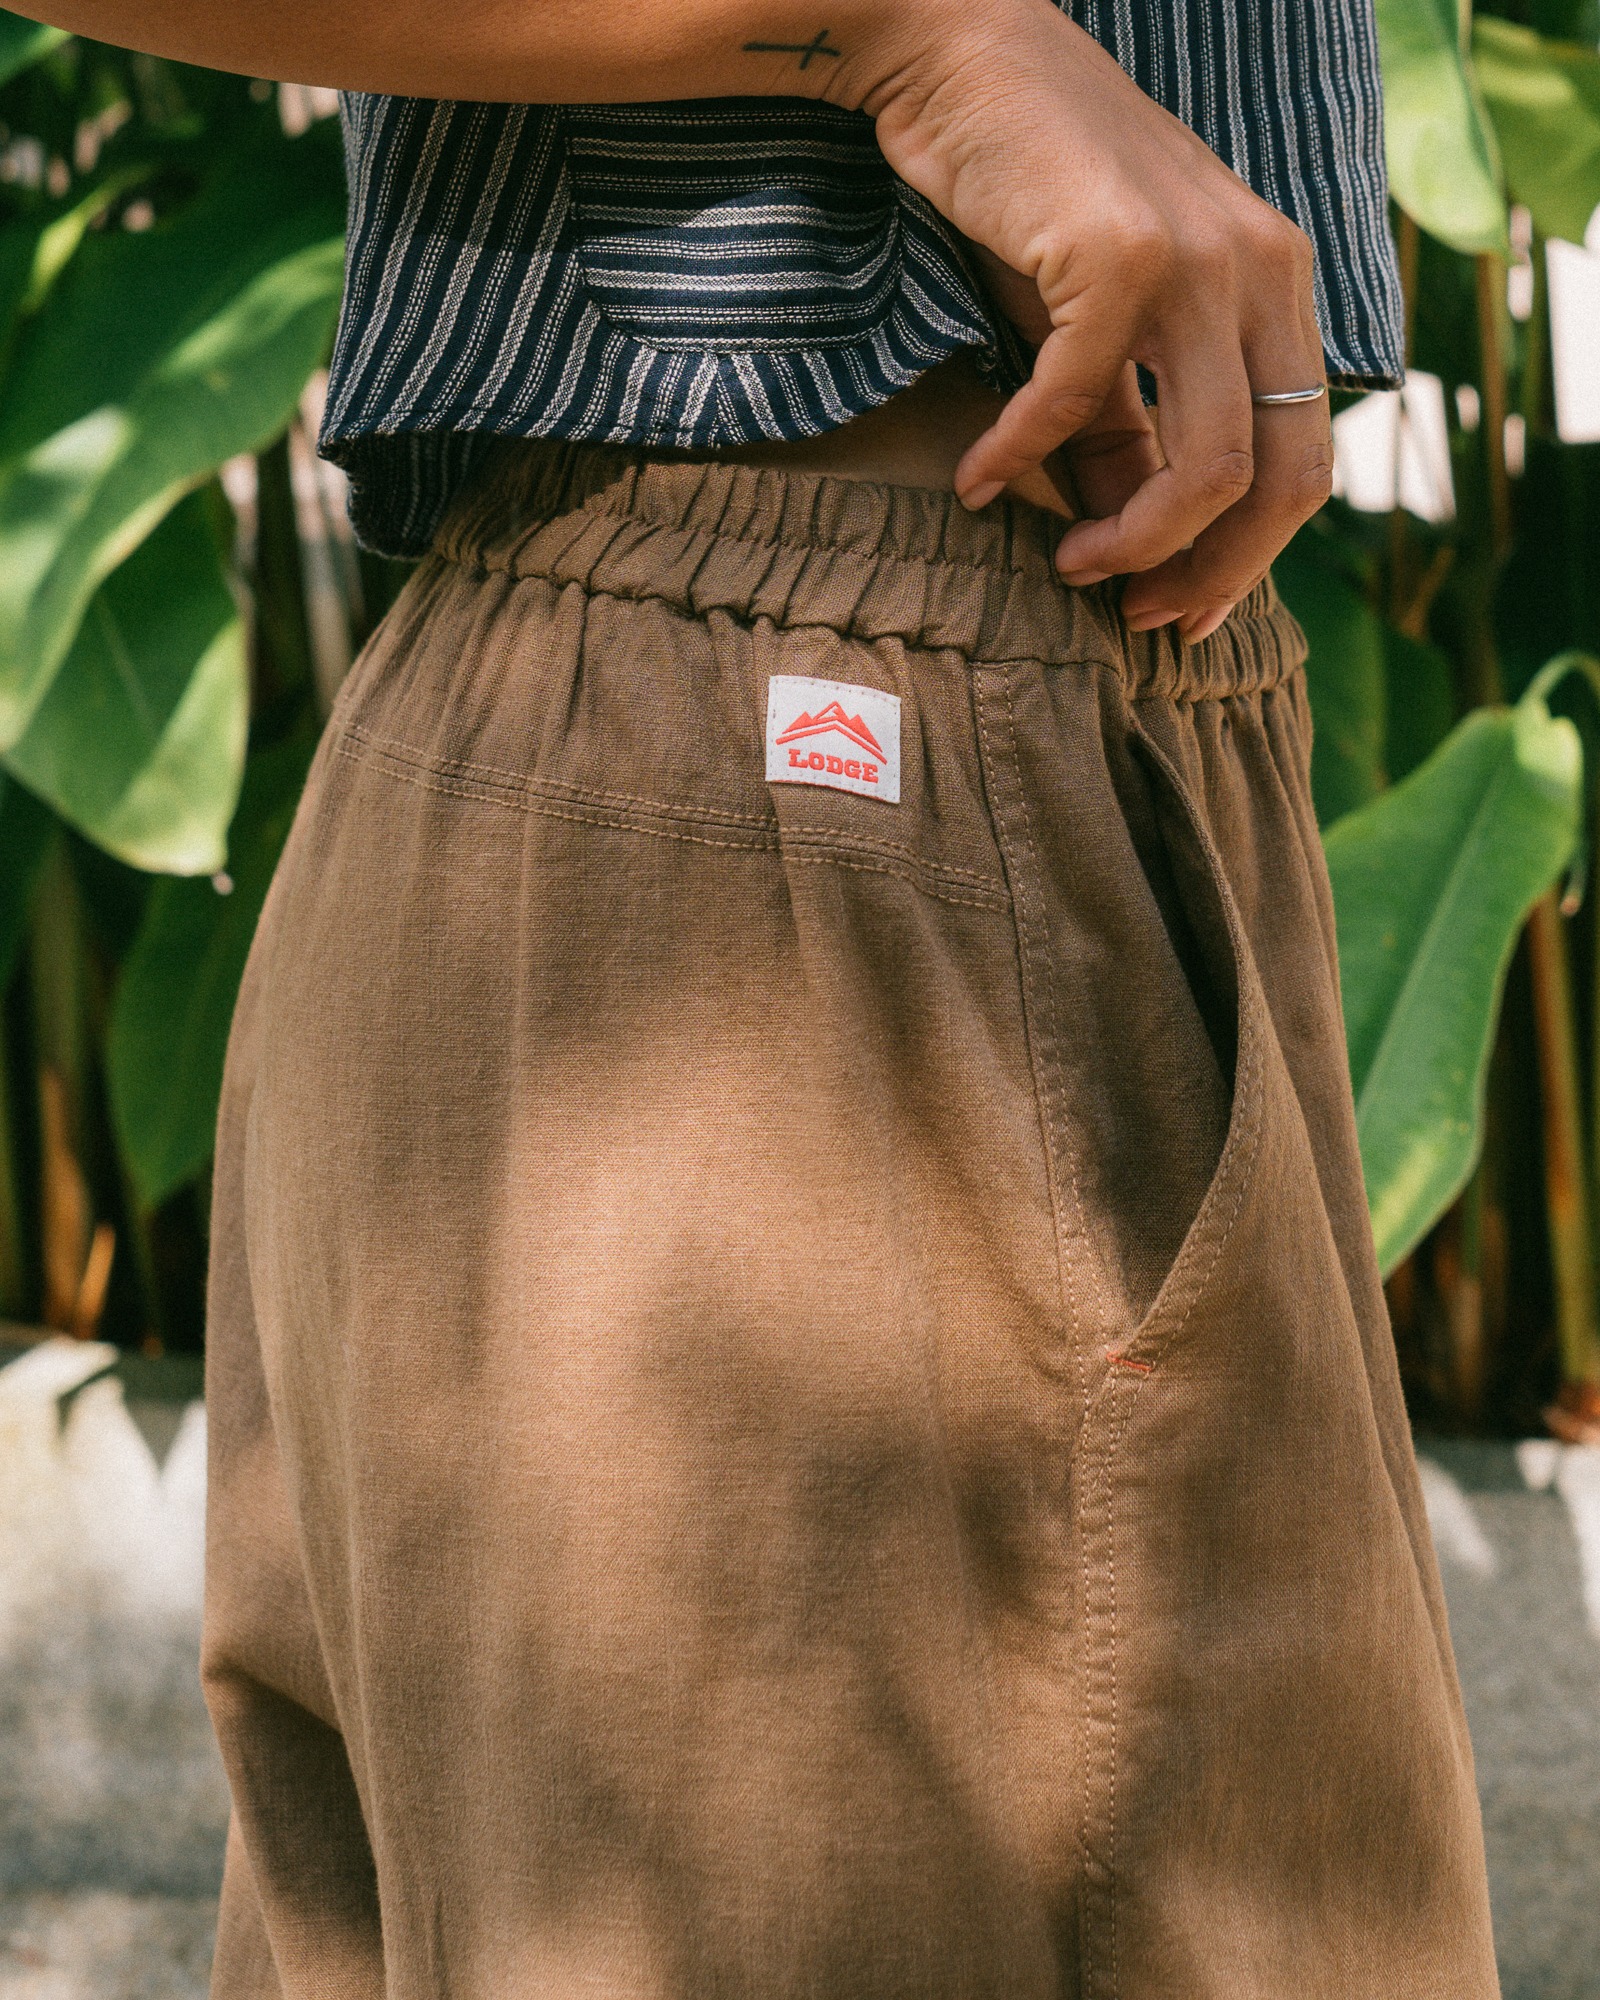 Battenwear - Active Lazy Pants. Never a more perfect time for them